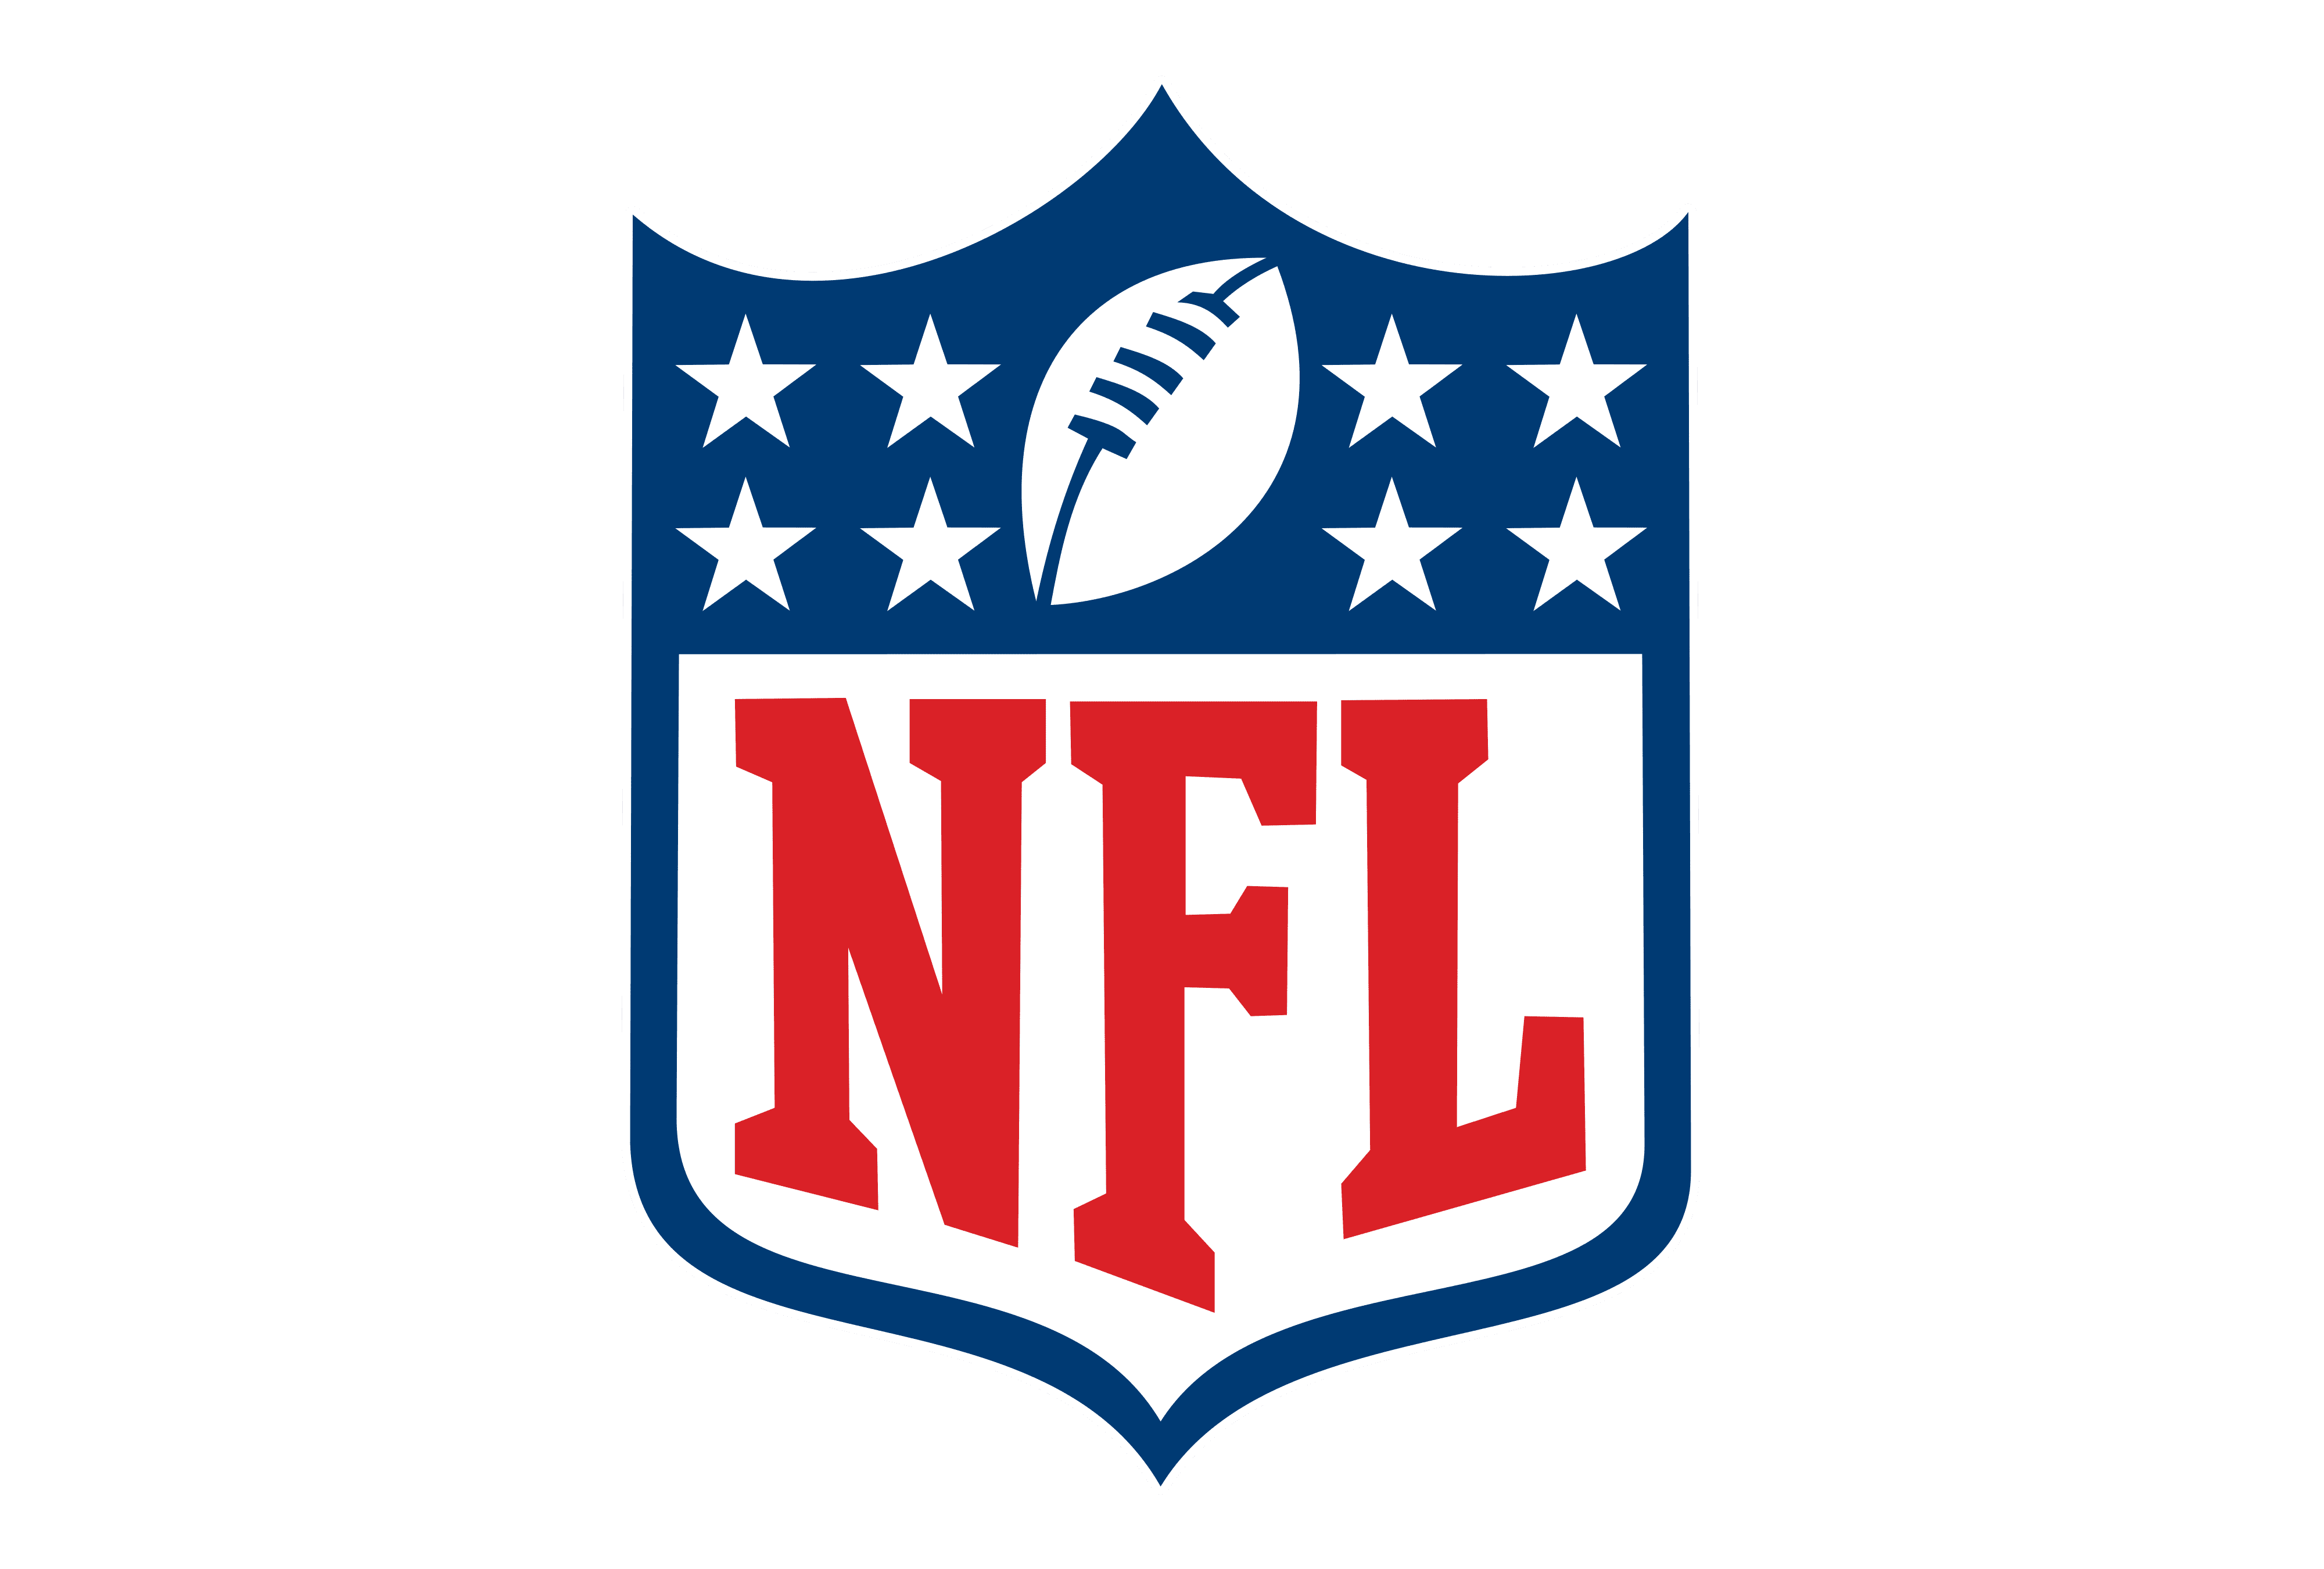 NFL Logo (National Football League) and symbol, meaning ...